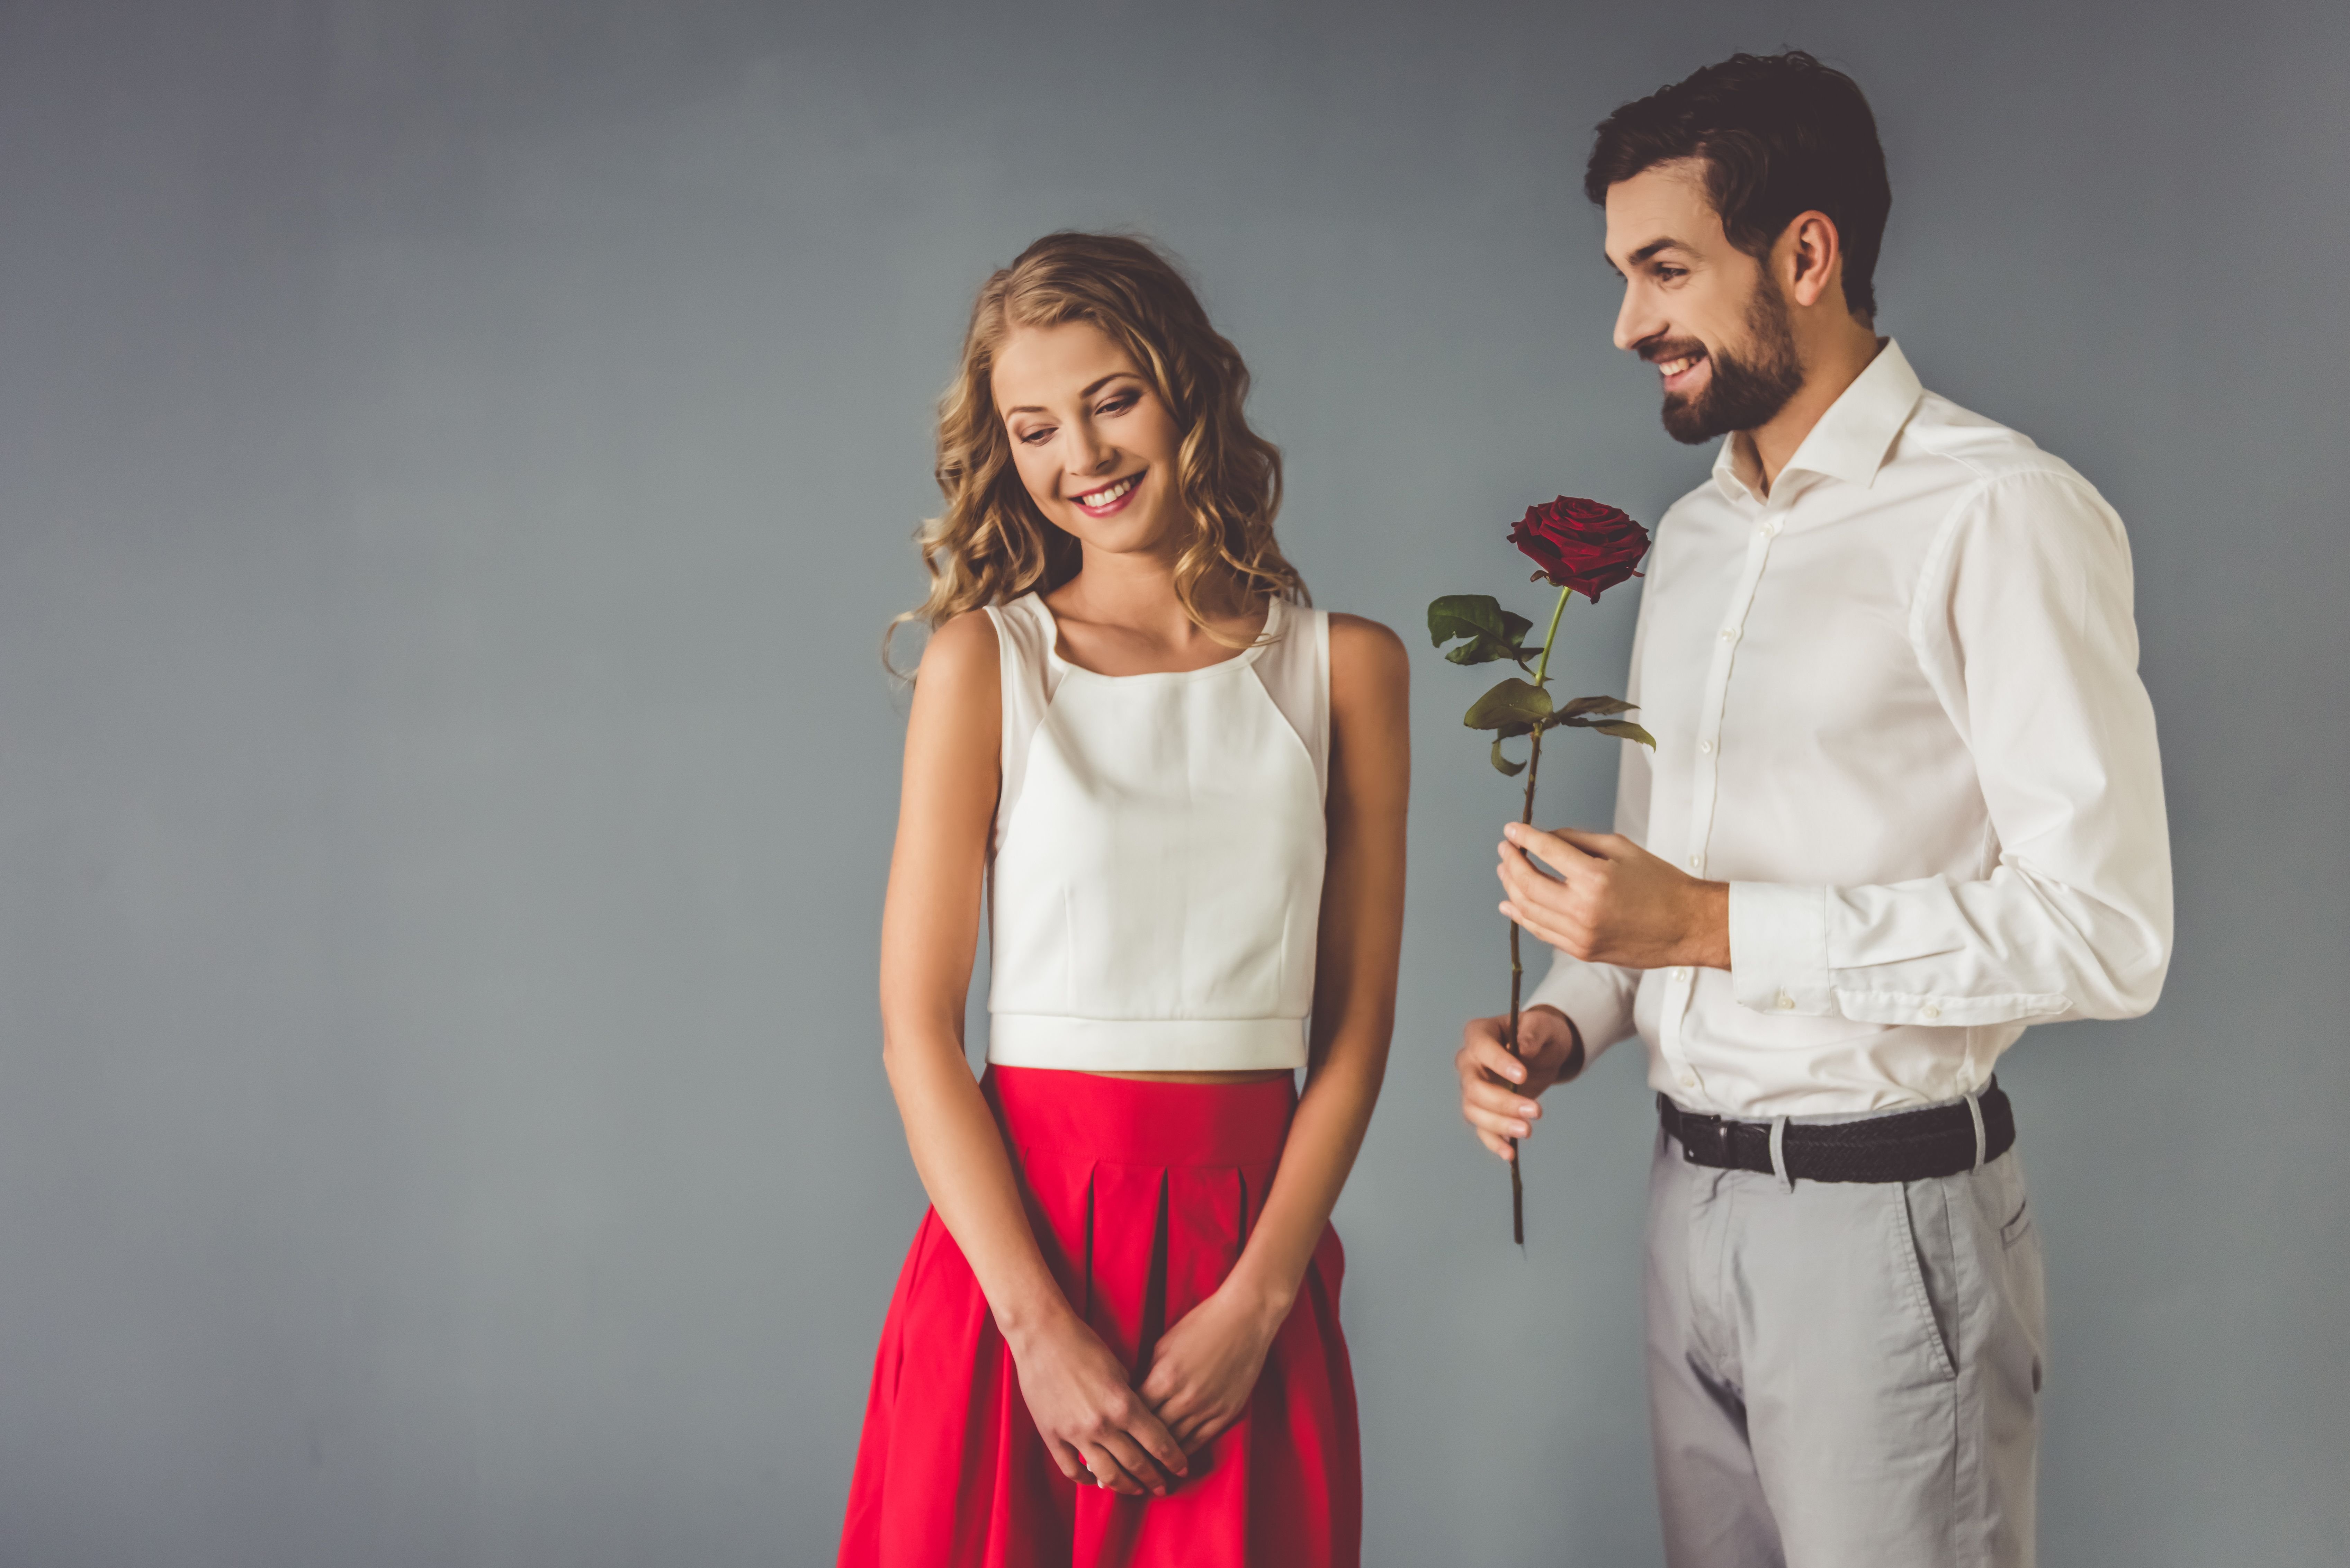 A guy gives a woman flowers. | Source: Shutterstock